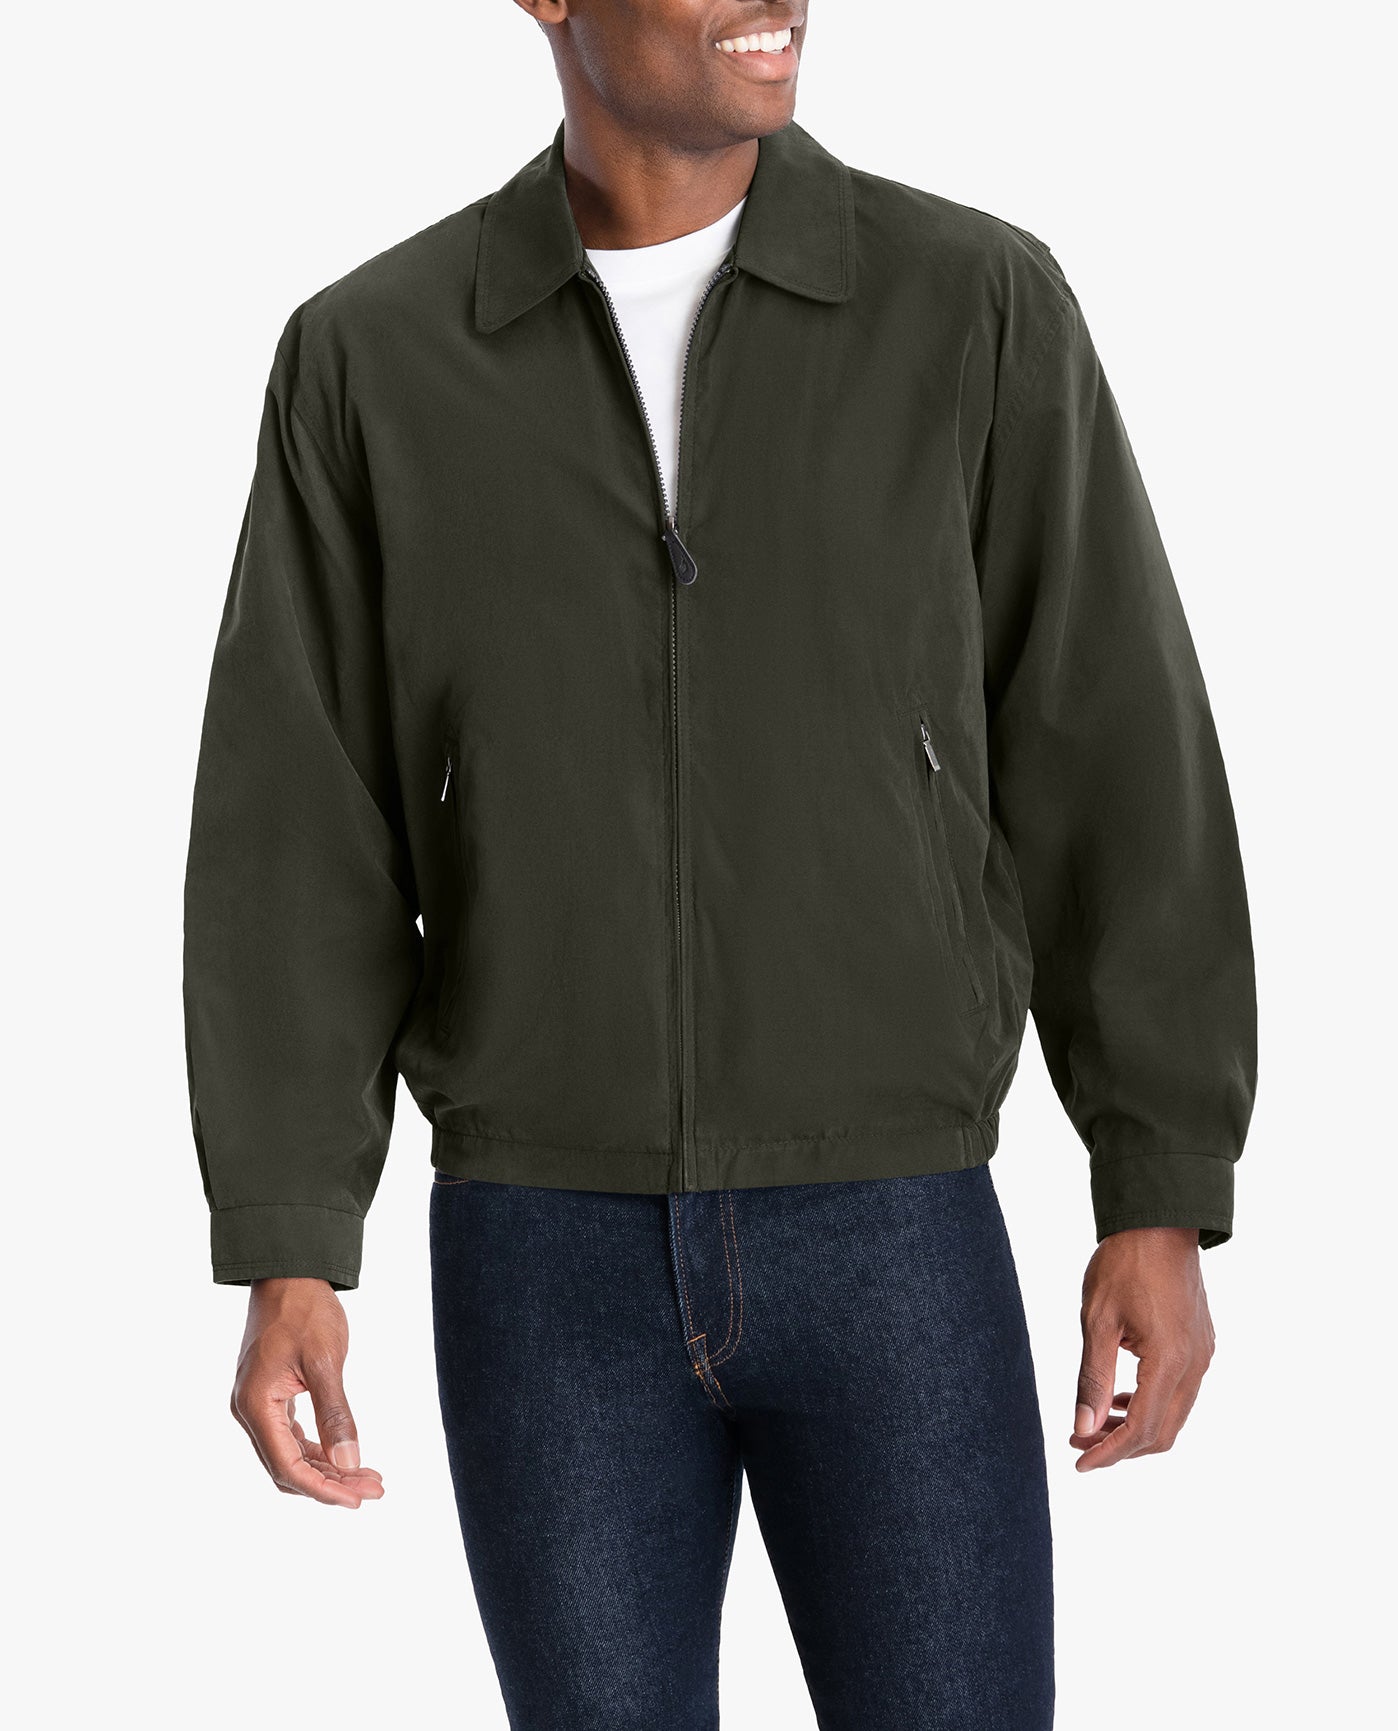 BACK OF LIGHT WEIGHT ZIP FRONT GOLF JACKET | OLIVE